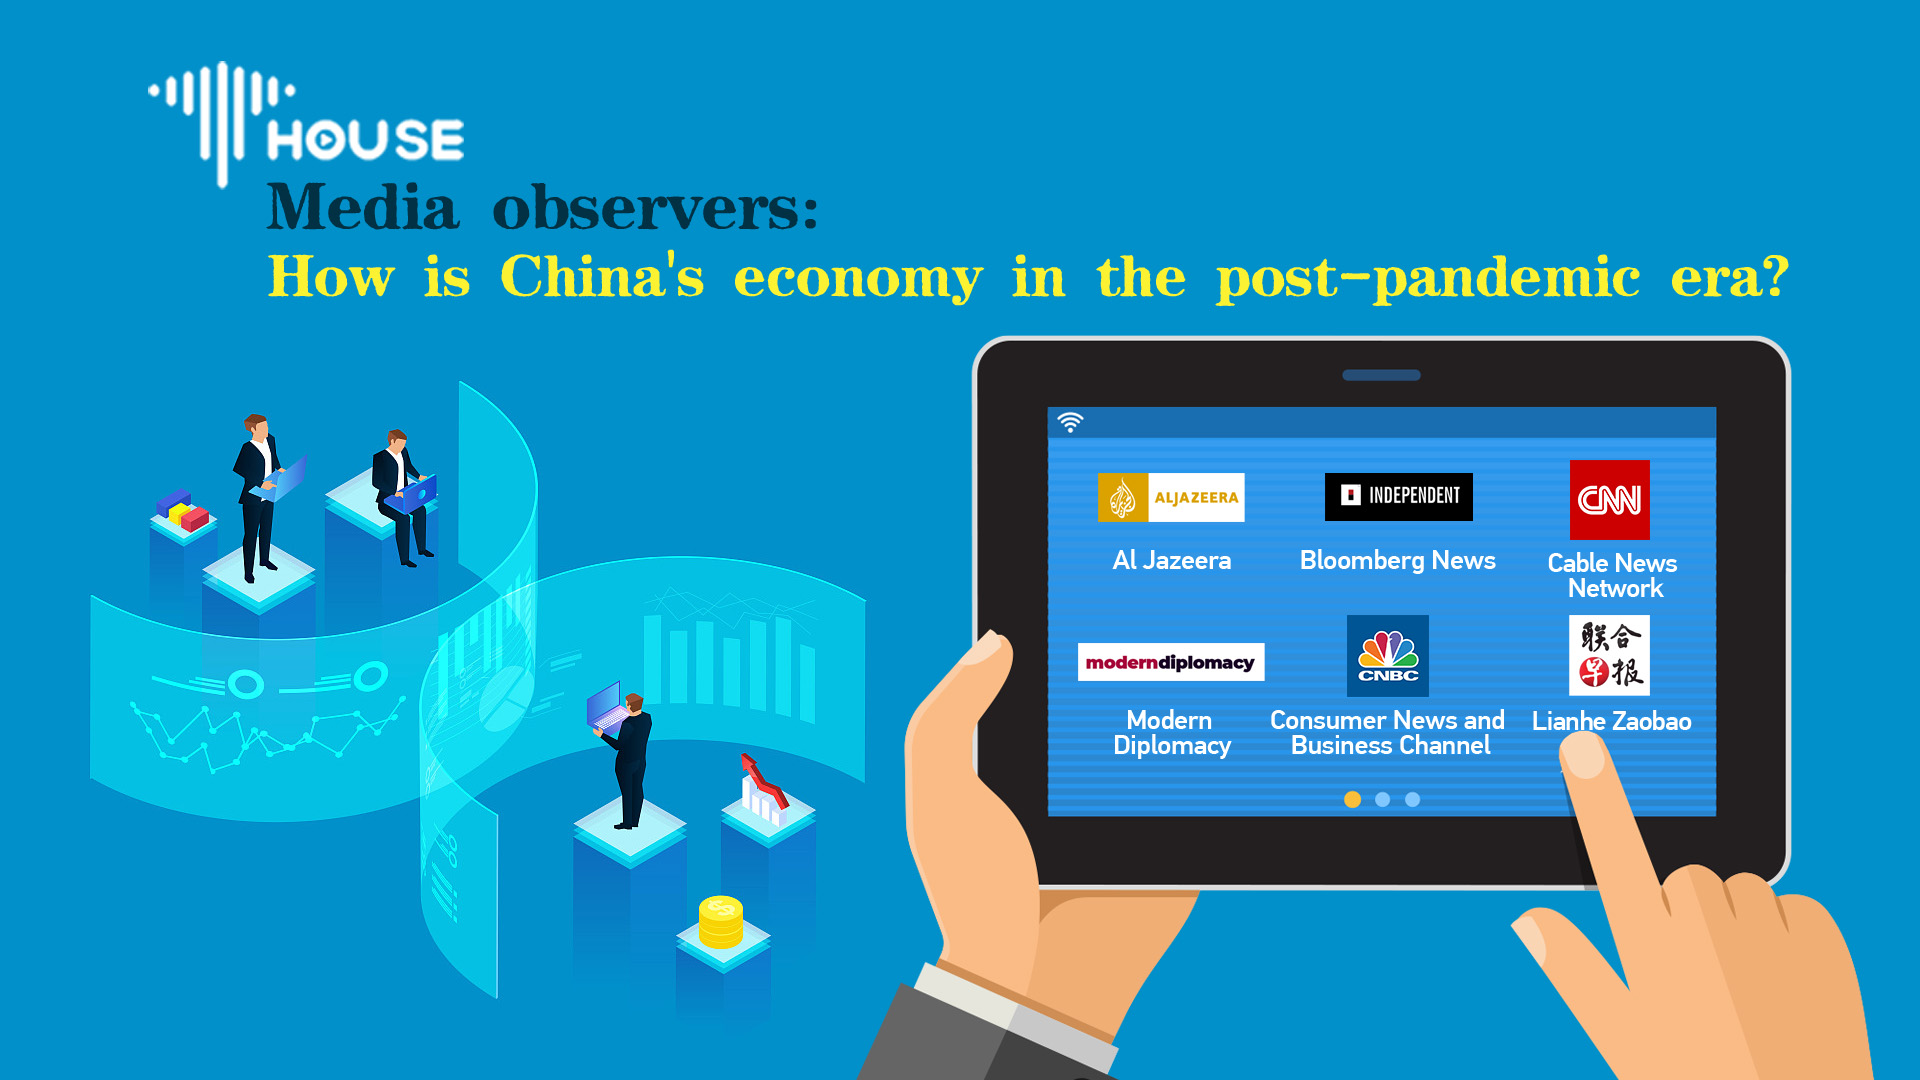 Media observers: How is China's economy in the post-pandemic era?